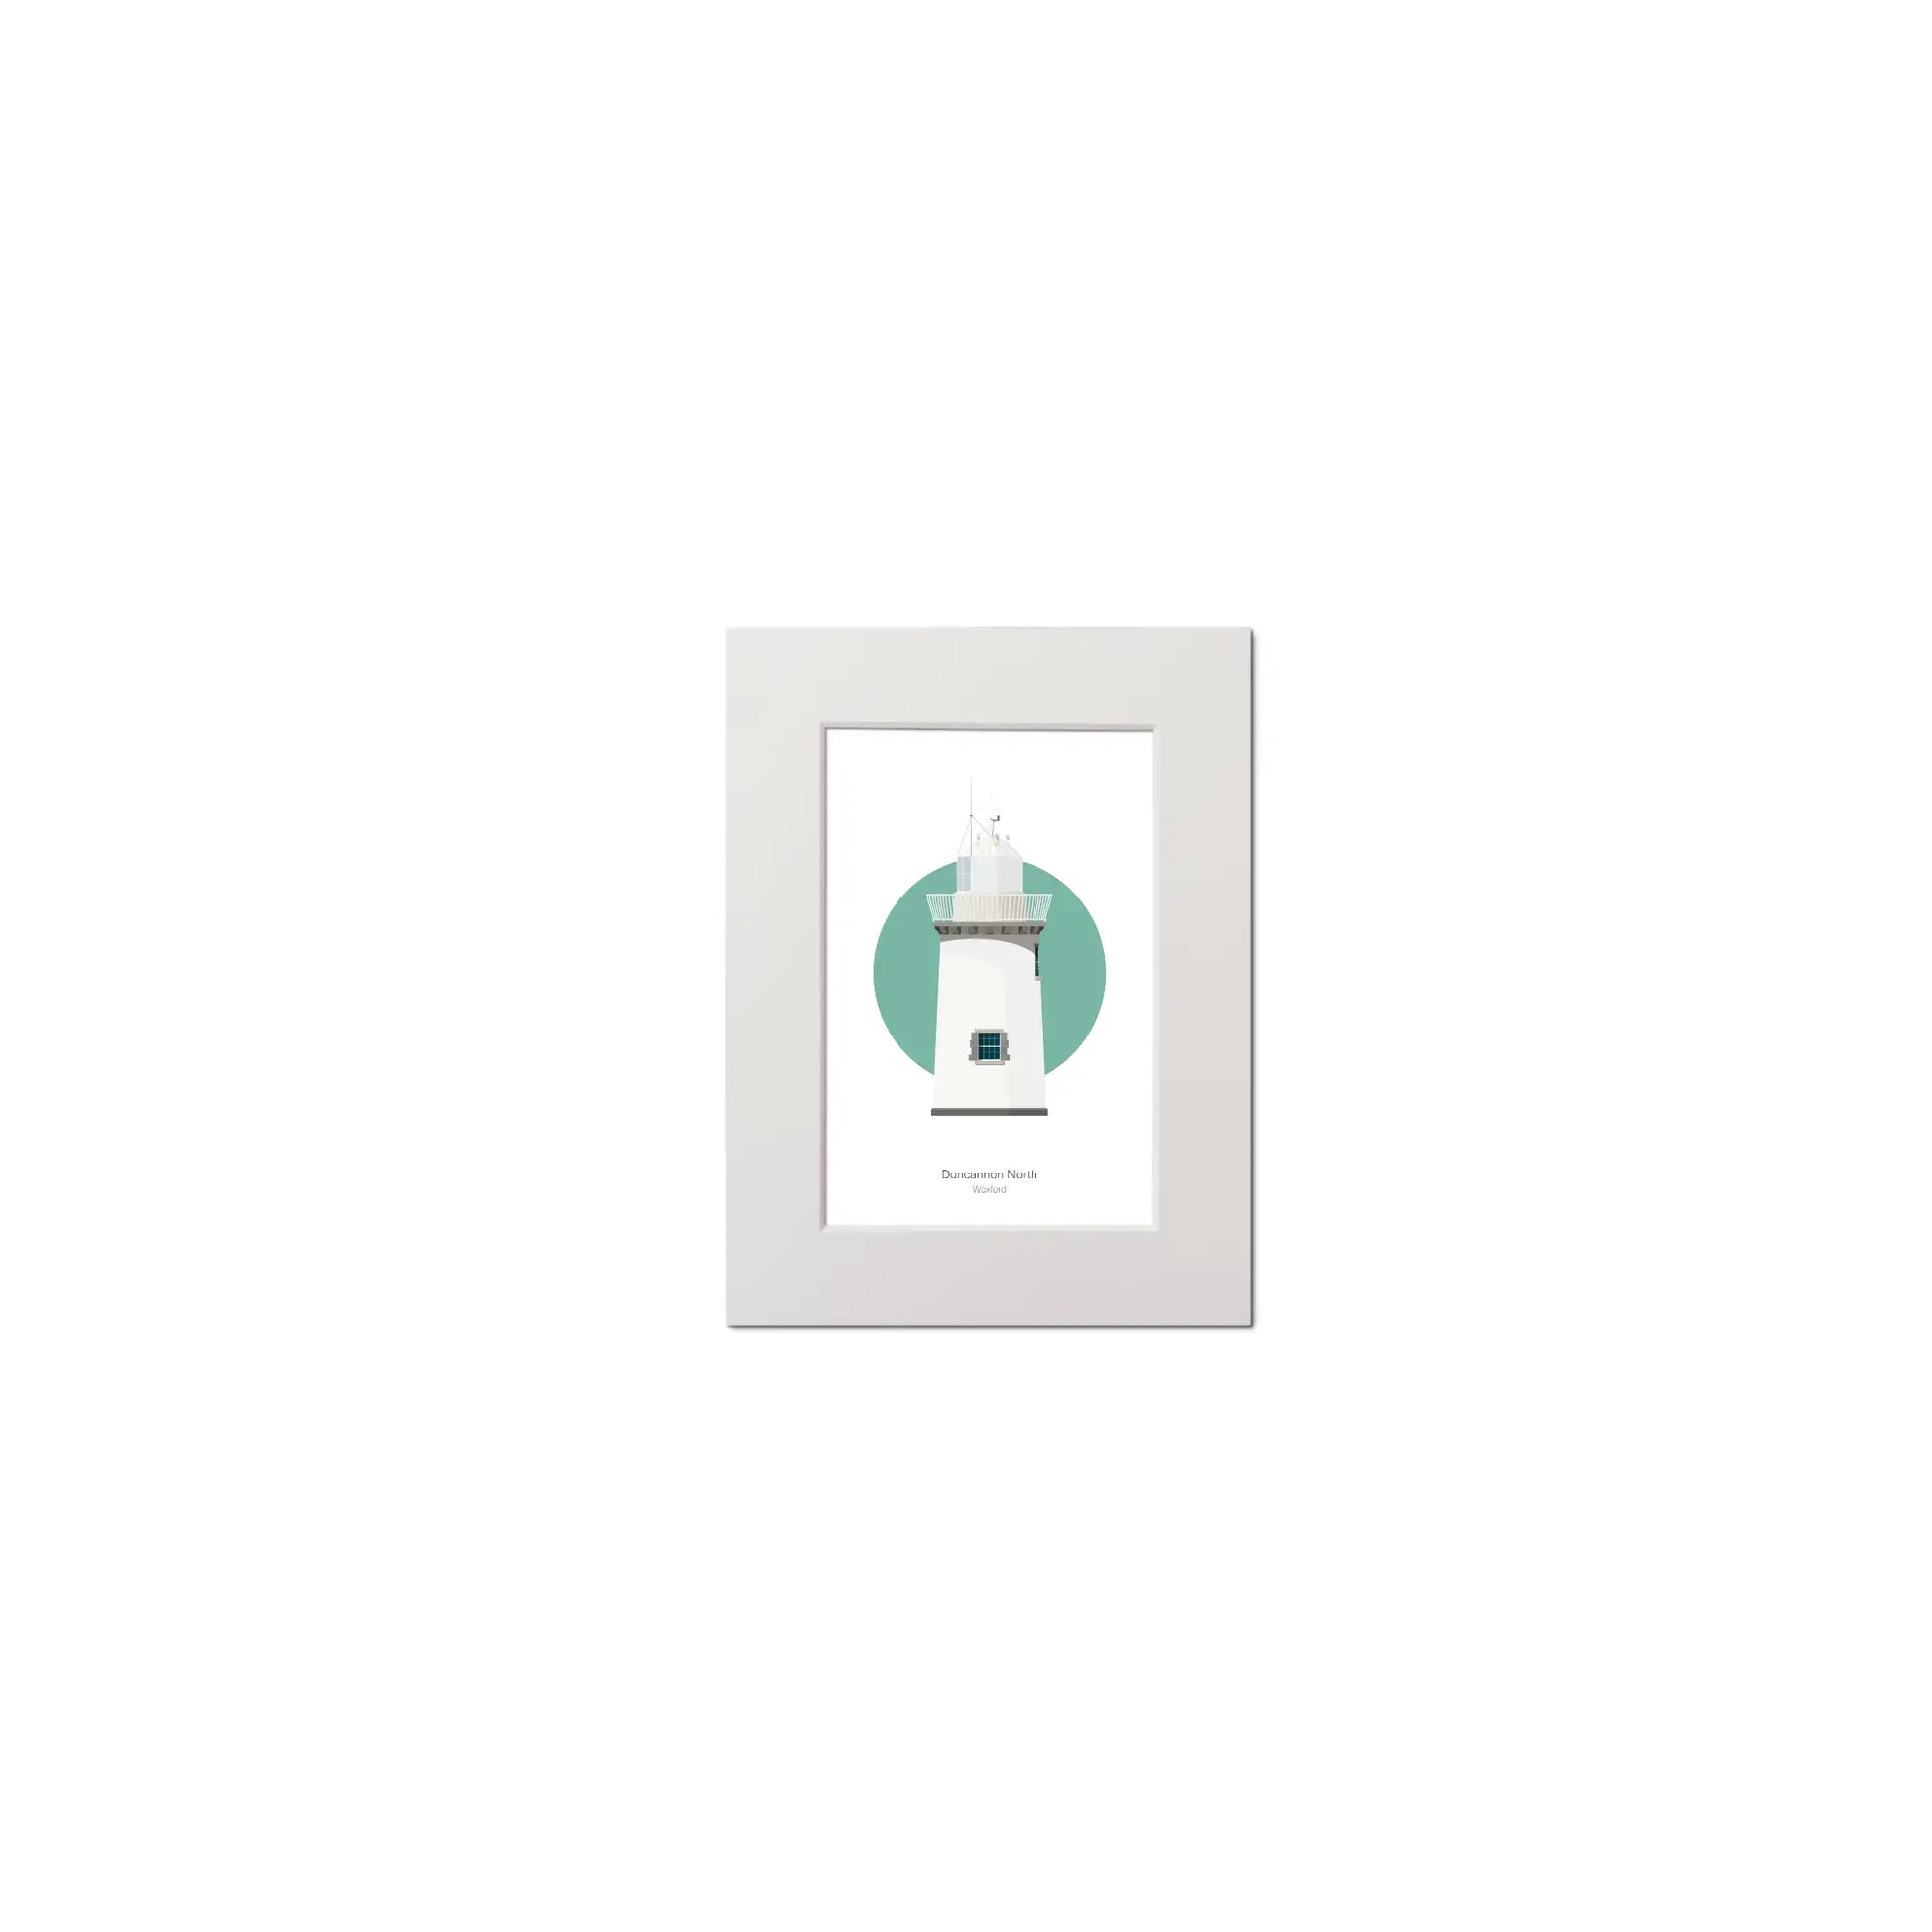 Contemporary graphic illustration of Duncannon North lighthouse on a white background inside light blue square, mounted and measuring 15x20cm.